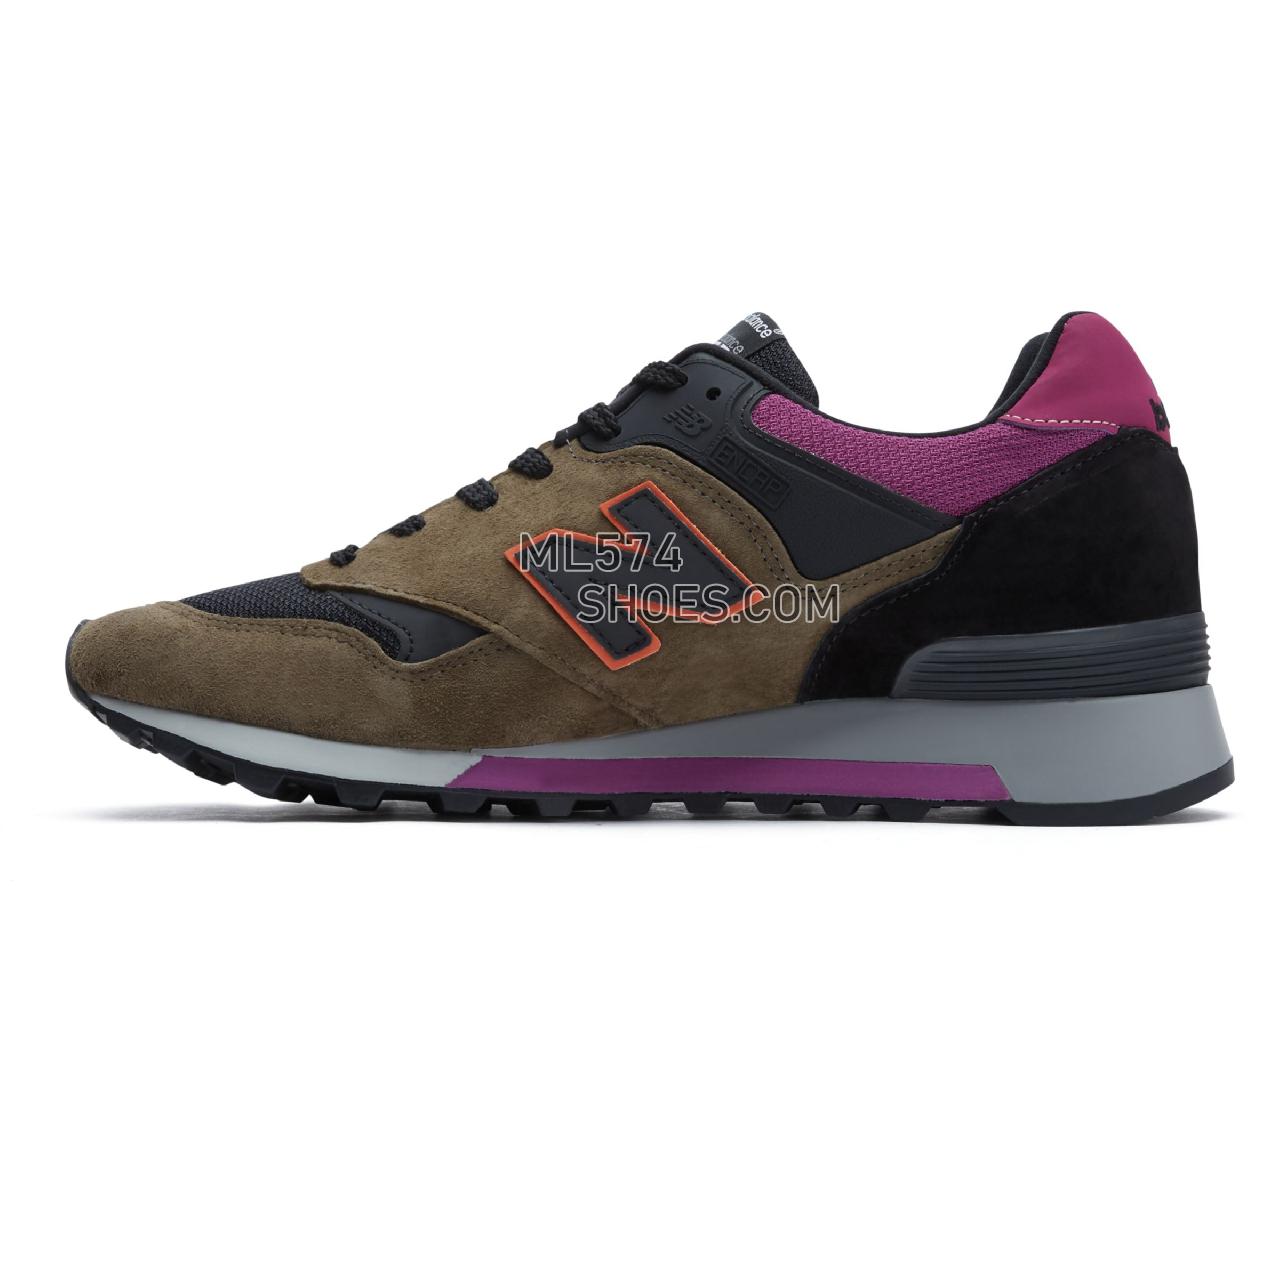 New Balance Made in UK 577 - Men's Made in UK 577 ML577V1-26190-M - Black with Khaki and Pink - M577KPO